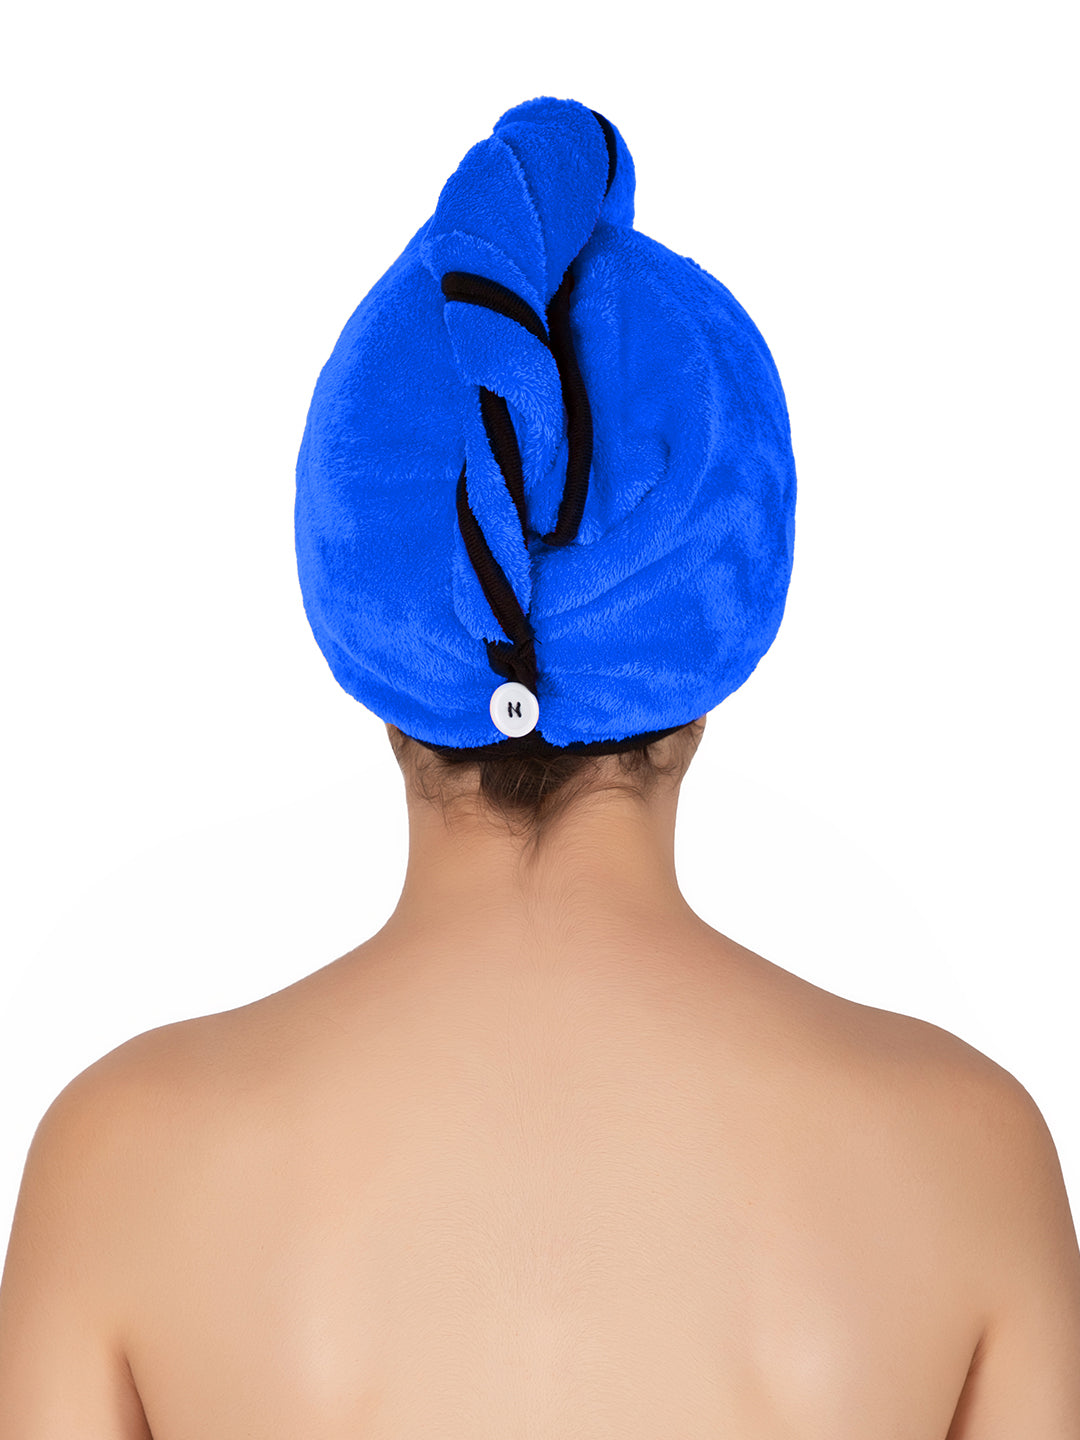 SOFTSPUN Microfiber Hair Cap 1 Pcs 70X25 cm 280 GSM Super Absorbent Quick Dry Hair Turban for Drying All Kinds of Hair Straight or Curly Short or Long Thin or Thick Hair.